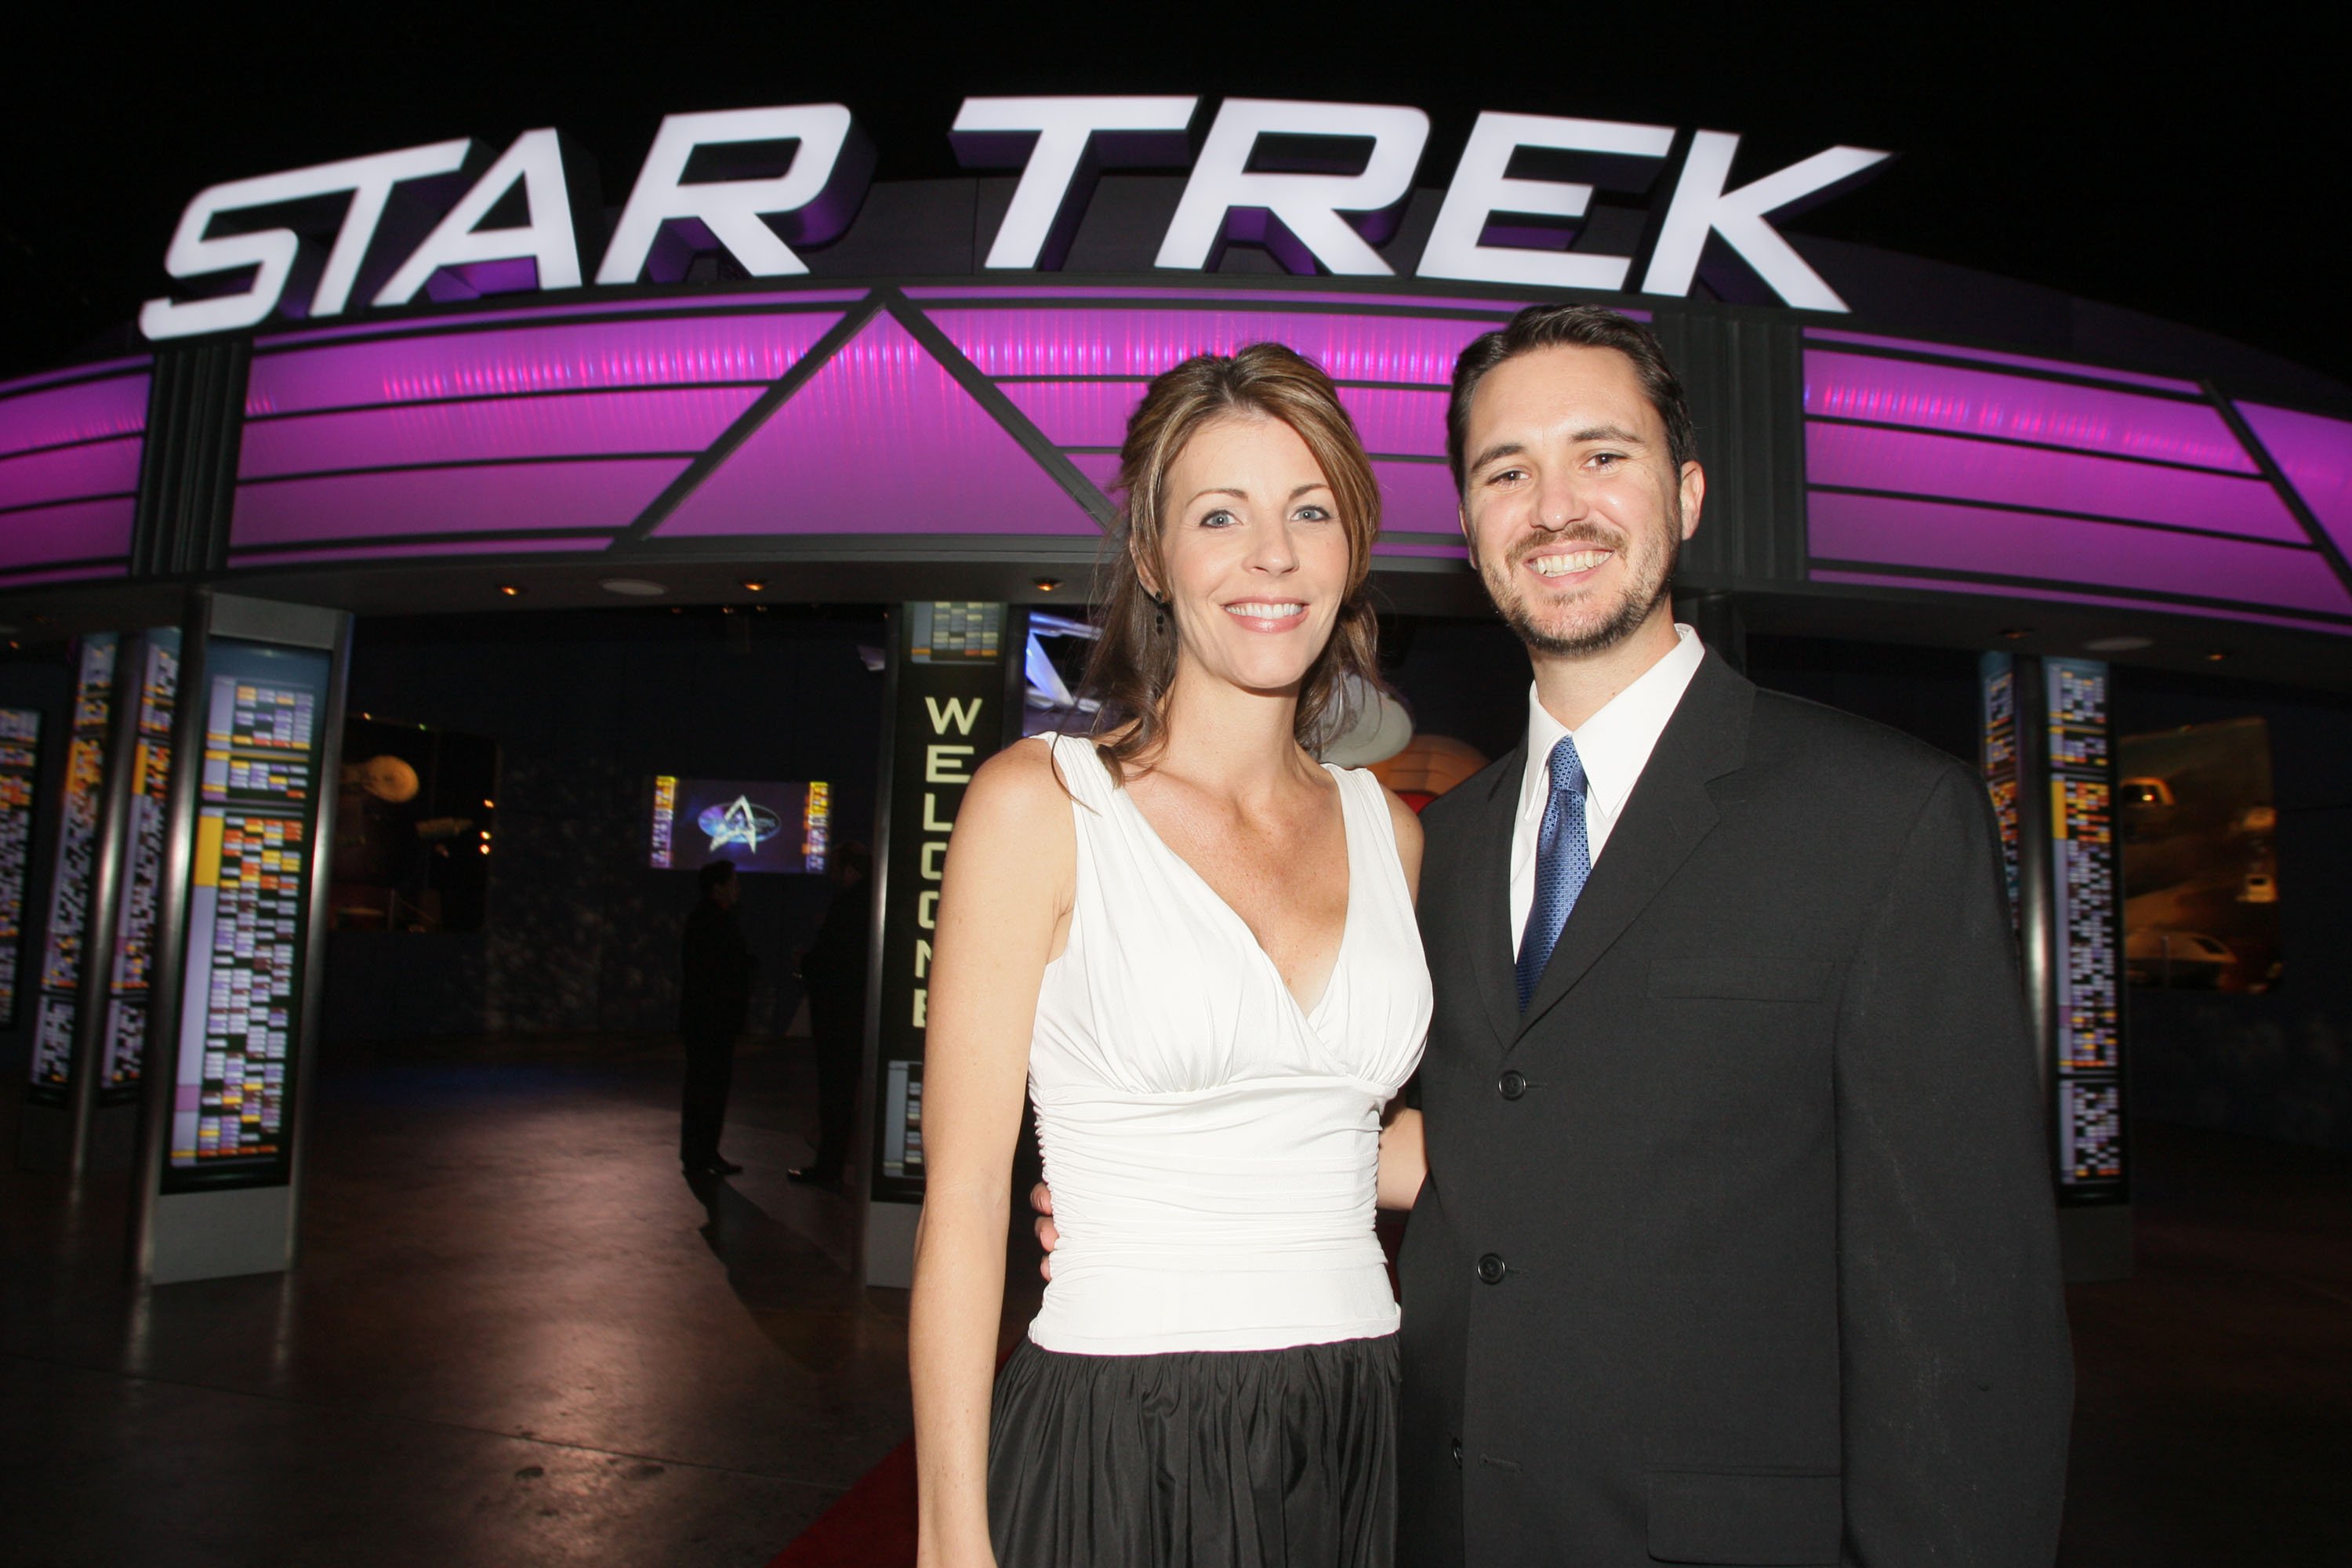 Wil and Anne Wheaton attend the Star Trek "The Tour" - North American Debut held at the Queen Mary Dome on January 17, 2008 | Source: Getty Images